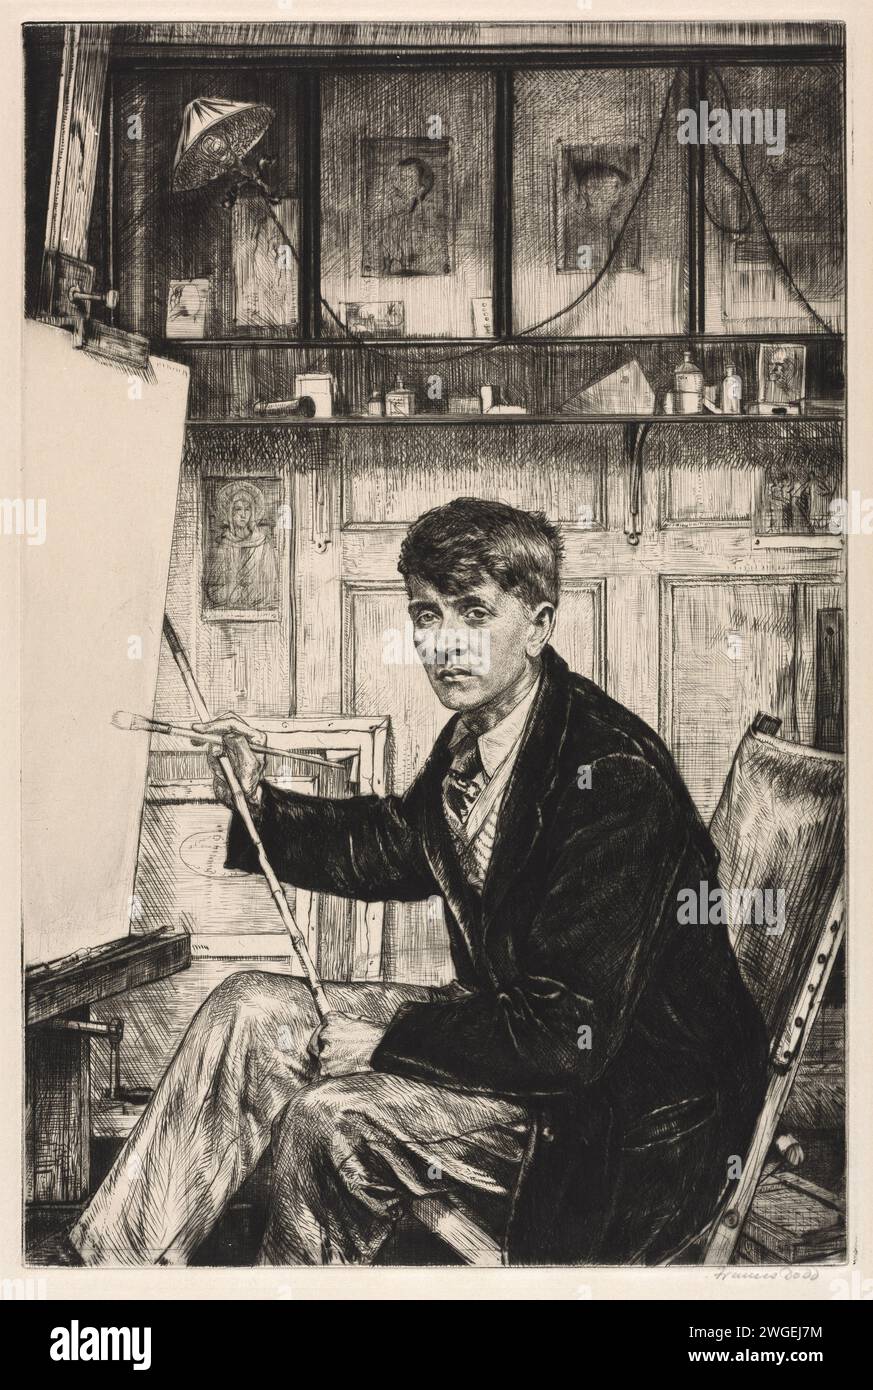 Charles Cundall by Francis Dodd. 1926.  Drypoint. Stock Photo